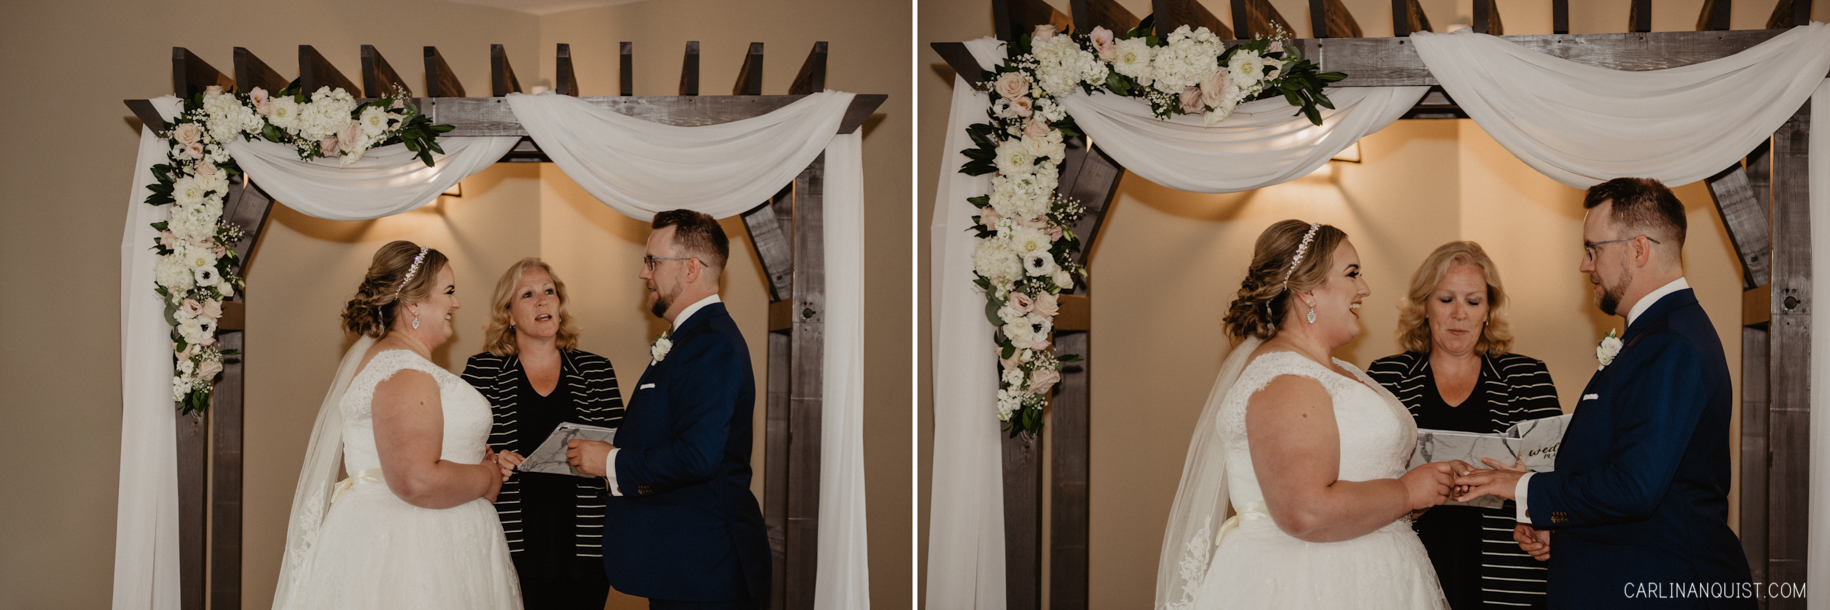 Bride & Groom Exchanging Rings at Apple Creek Golf Course | Sue Deyell Wedding Officiant